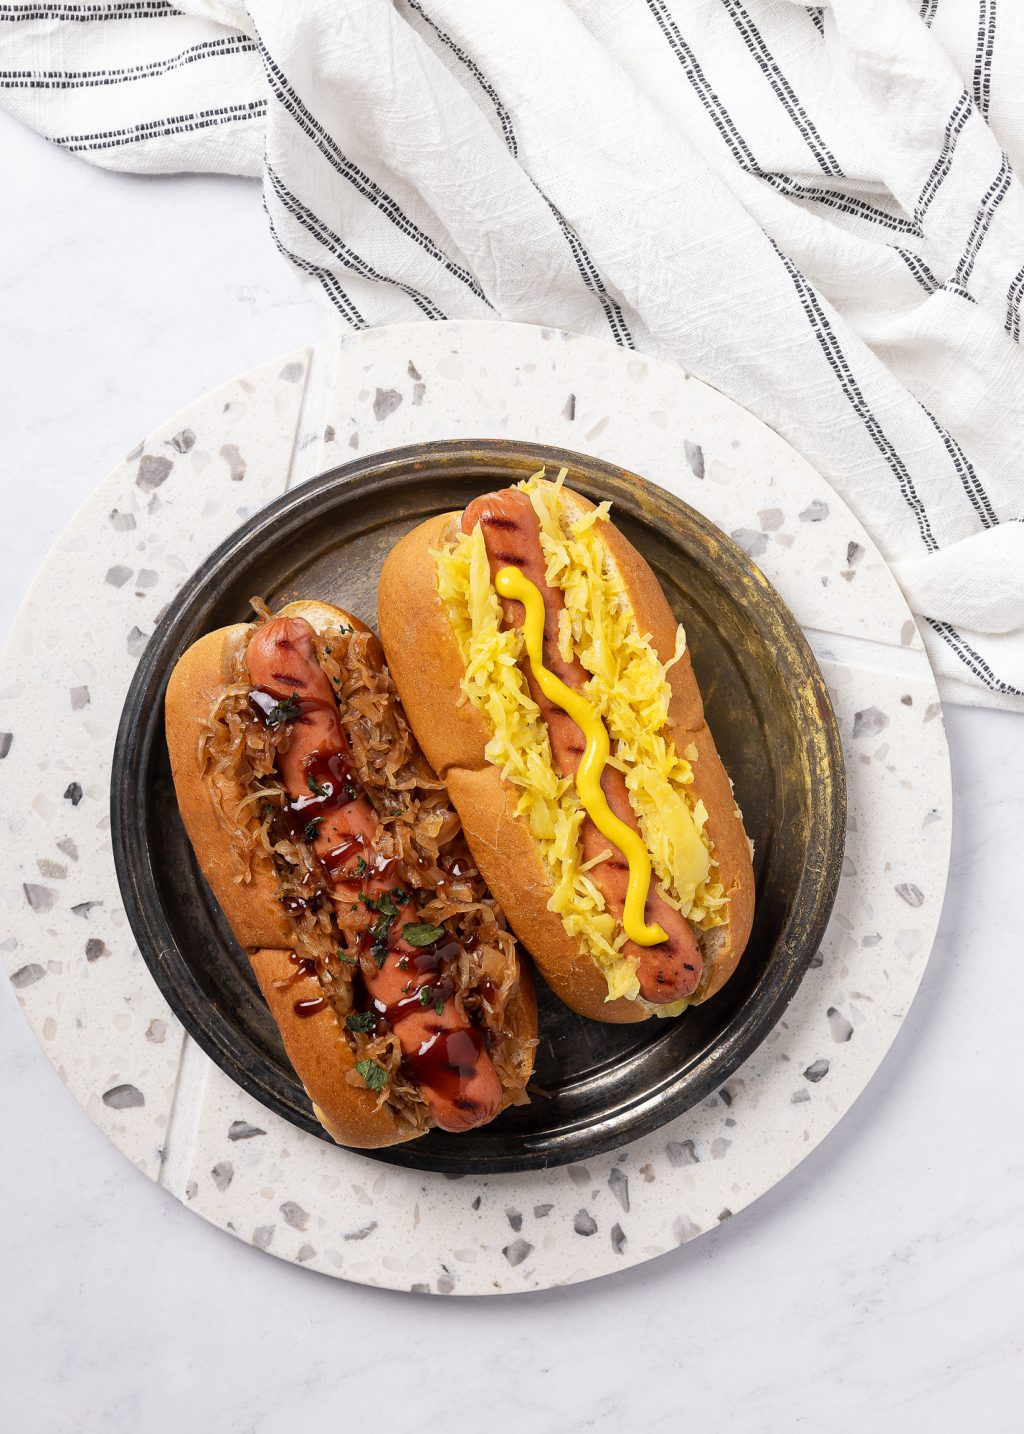 Classic Grilled Hot Dogs with Frank's Kraut Flavors